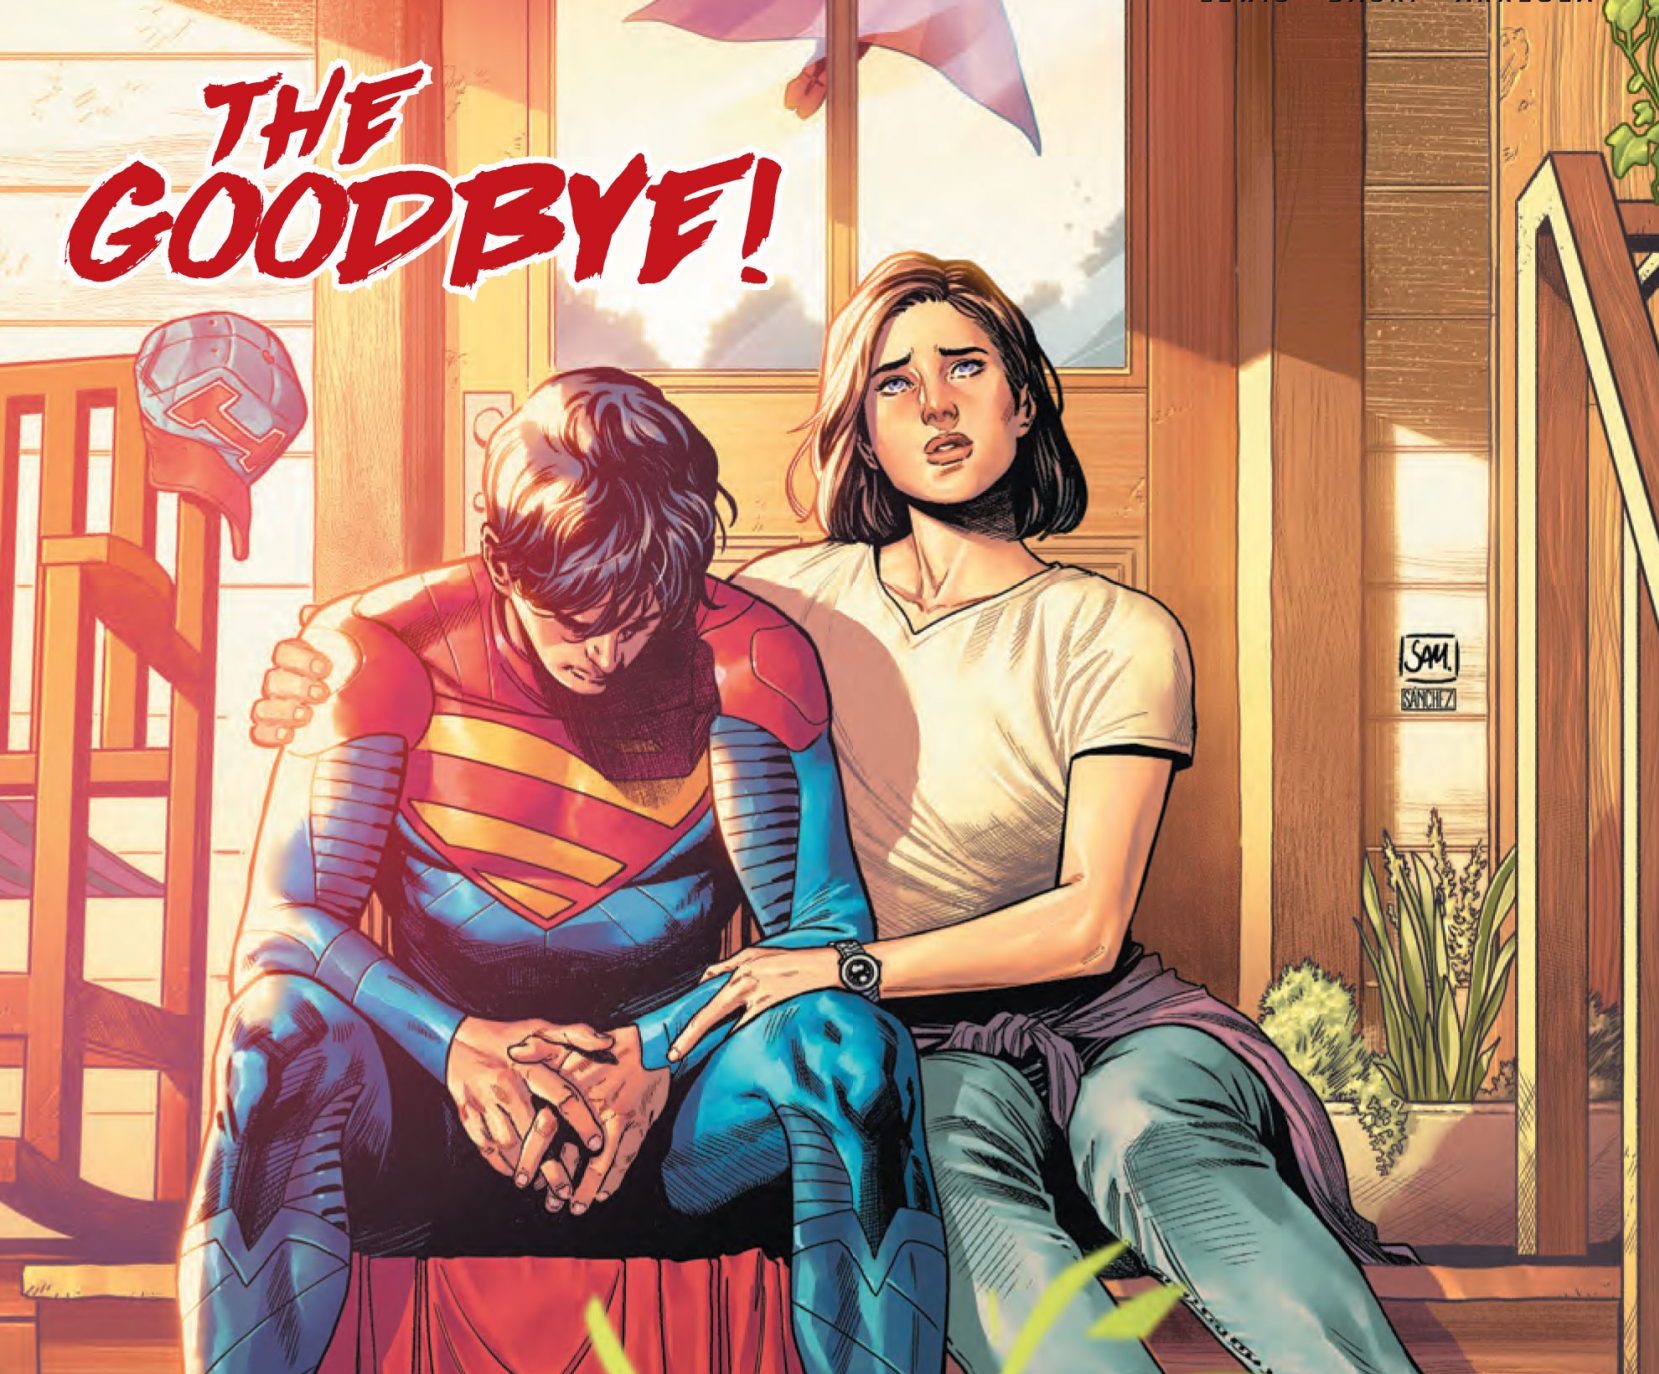 'Action Comics' #1035 offers meaningful goodbyes from Superman